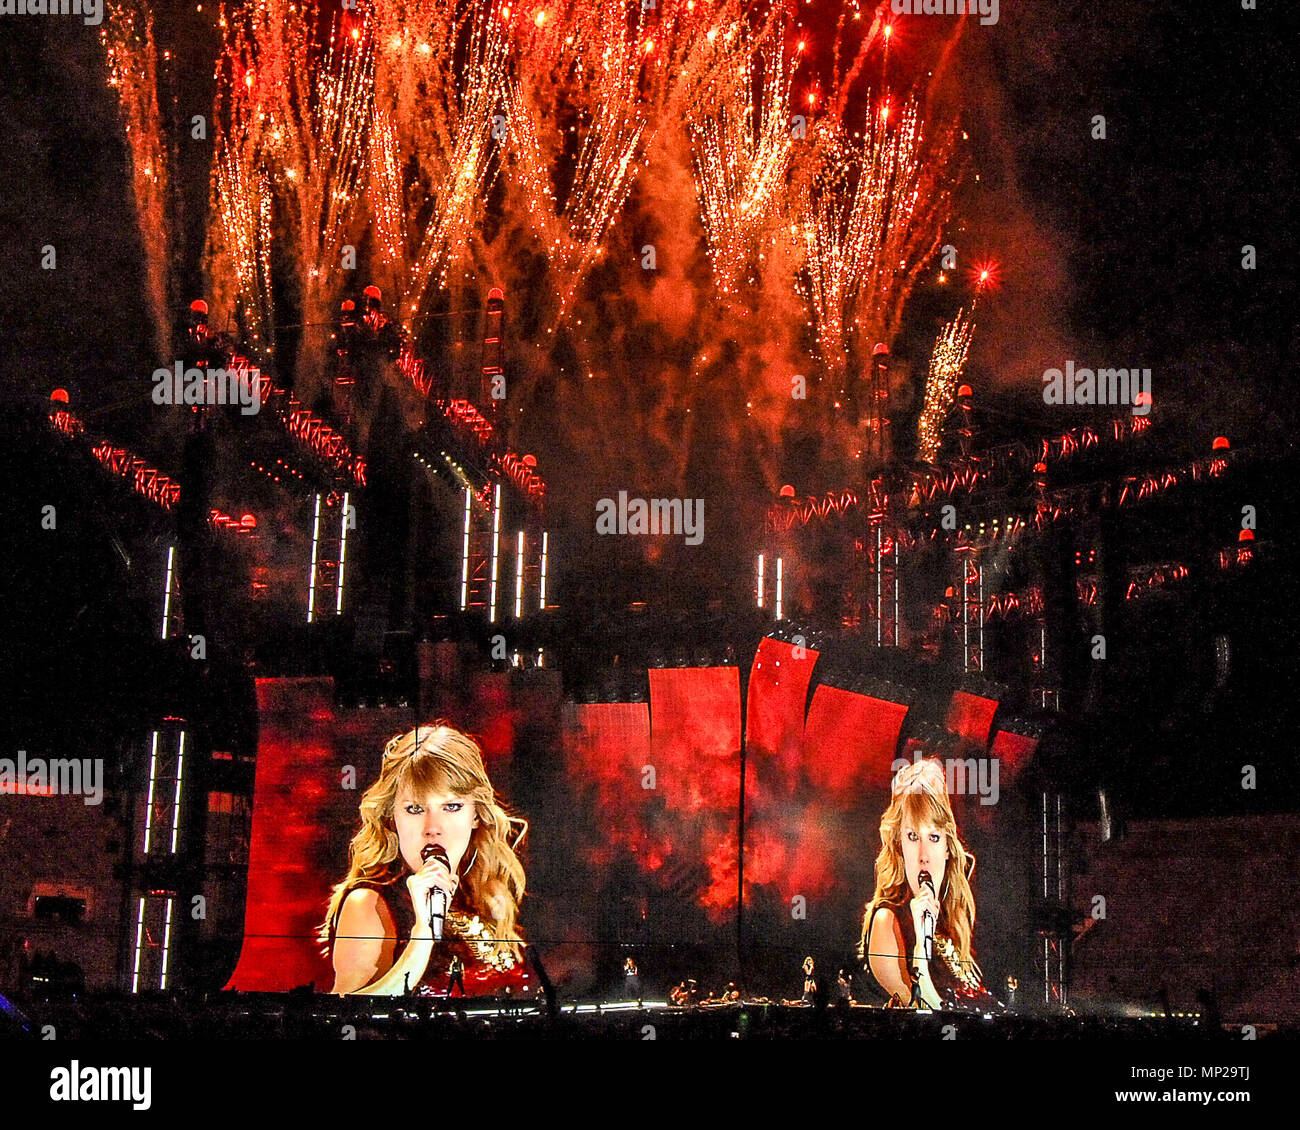 Pasadena, CA, USA. 18th May, 2018. Taylor Swift performs live on stage during the Reputation Stadium Tour at the Rose Bowl on Friday, May 18, 2018, in Pasadena, Calif. Taylor Alison Swift is an American singer-songwriter. One of the leading contemporary recording artists, she is known for narrative songs about her personal life, which have received widespread media coverage. Multiple BBMA 2018 Winner. Credit: Dave Safley/ZUMA Wire/Alamy Live News Stock Photo